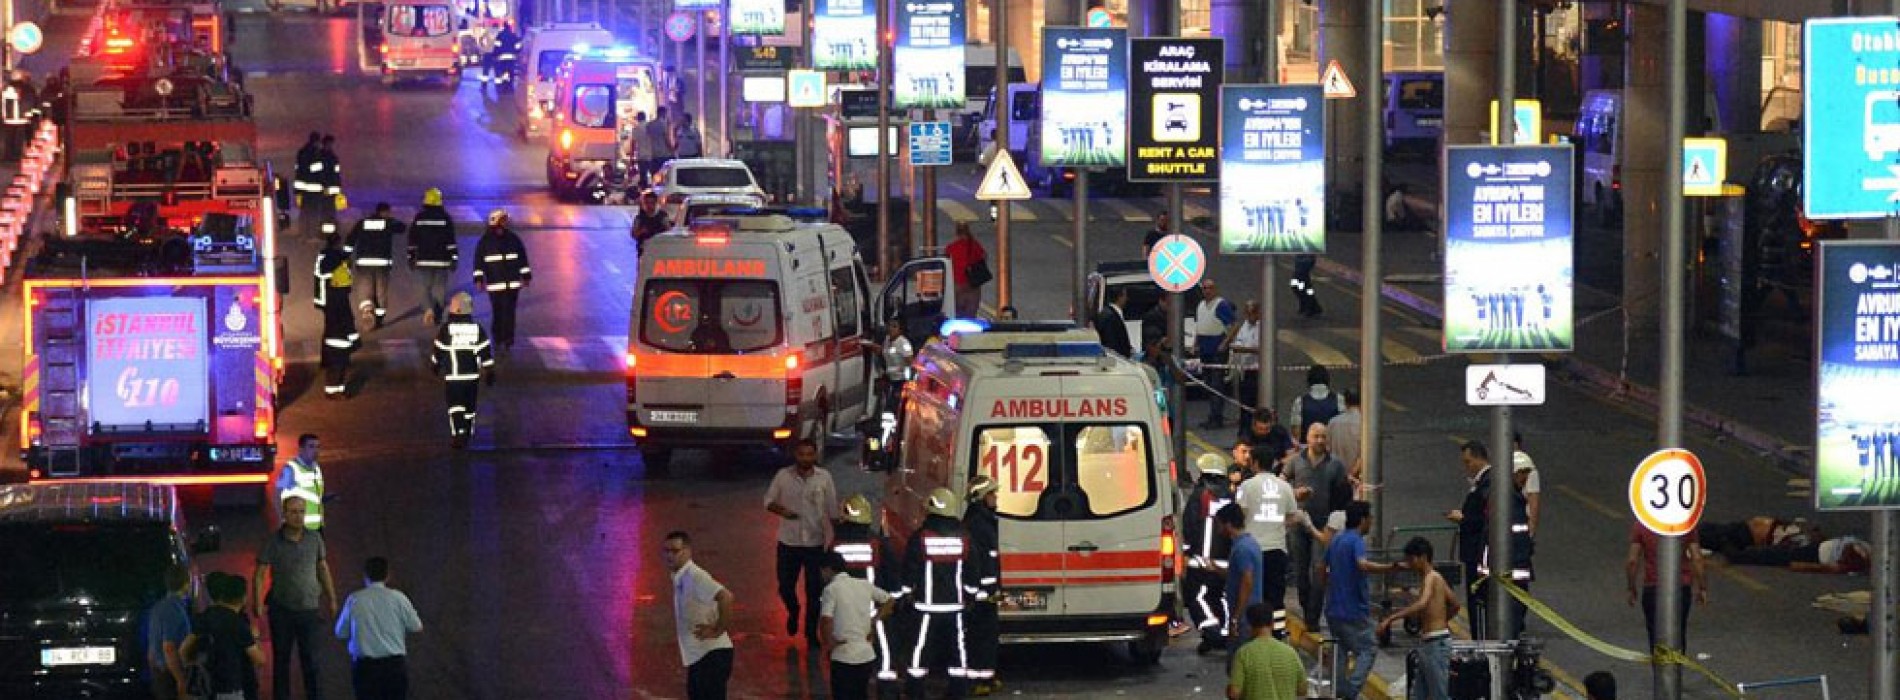 Istanbul Ataturk airport attack: 41 dead and 239 injured in ‘hideous’ suicide bombings in Turkey